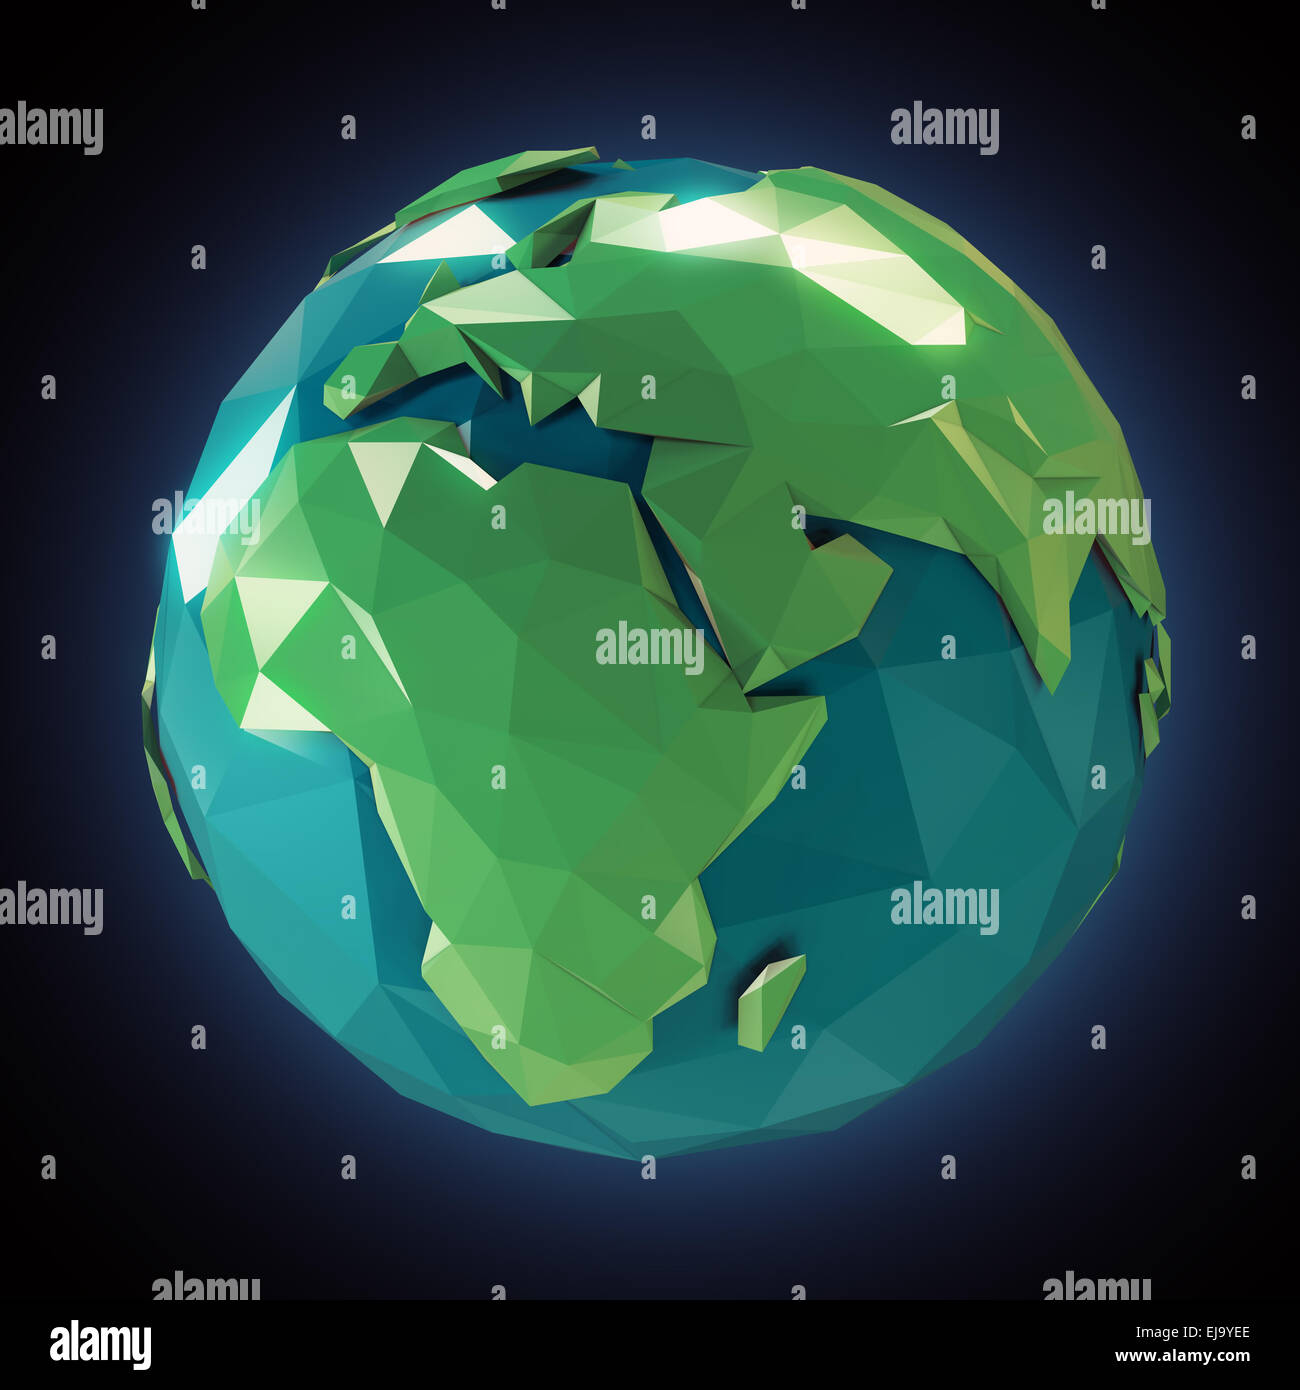 Stylized 3d abstract Earth model Stock Photo